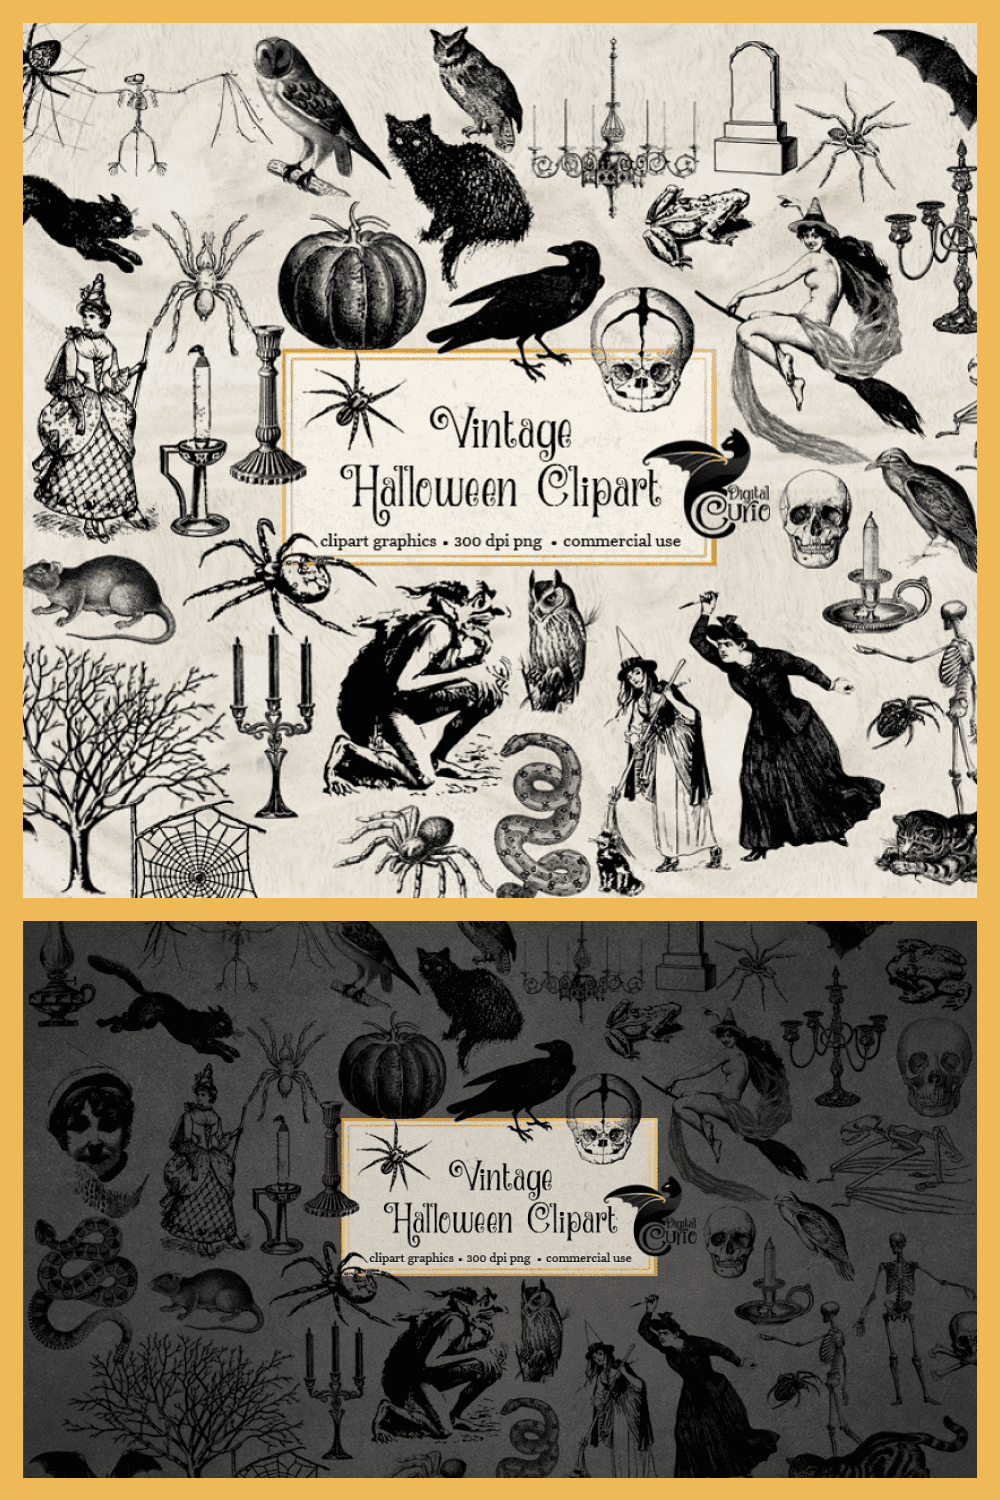 This is an incredible collection of Halloween illustrations in vintage style.